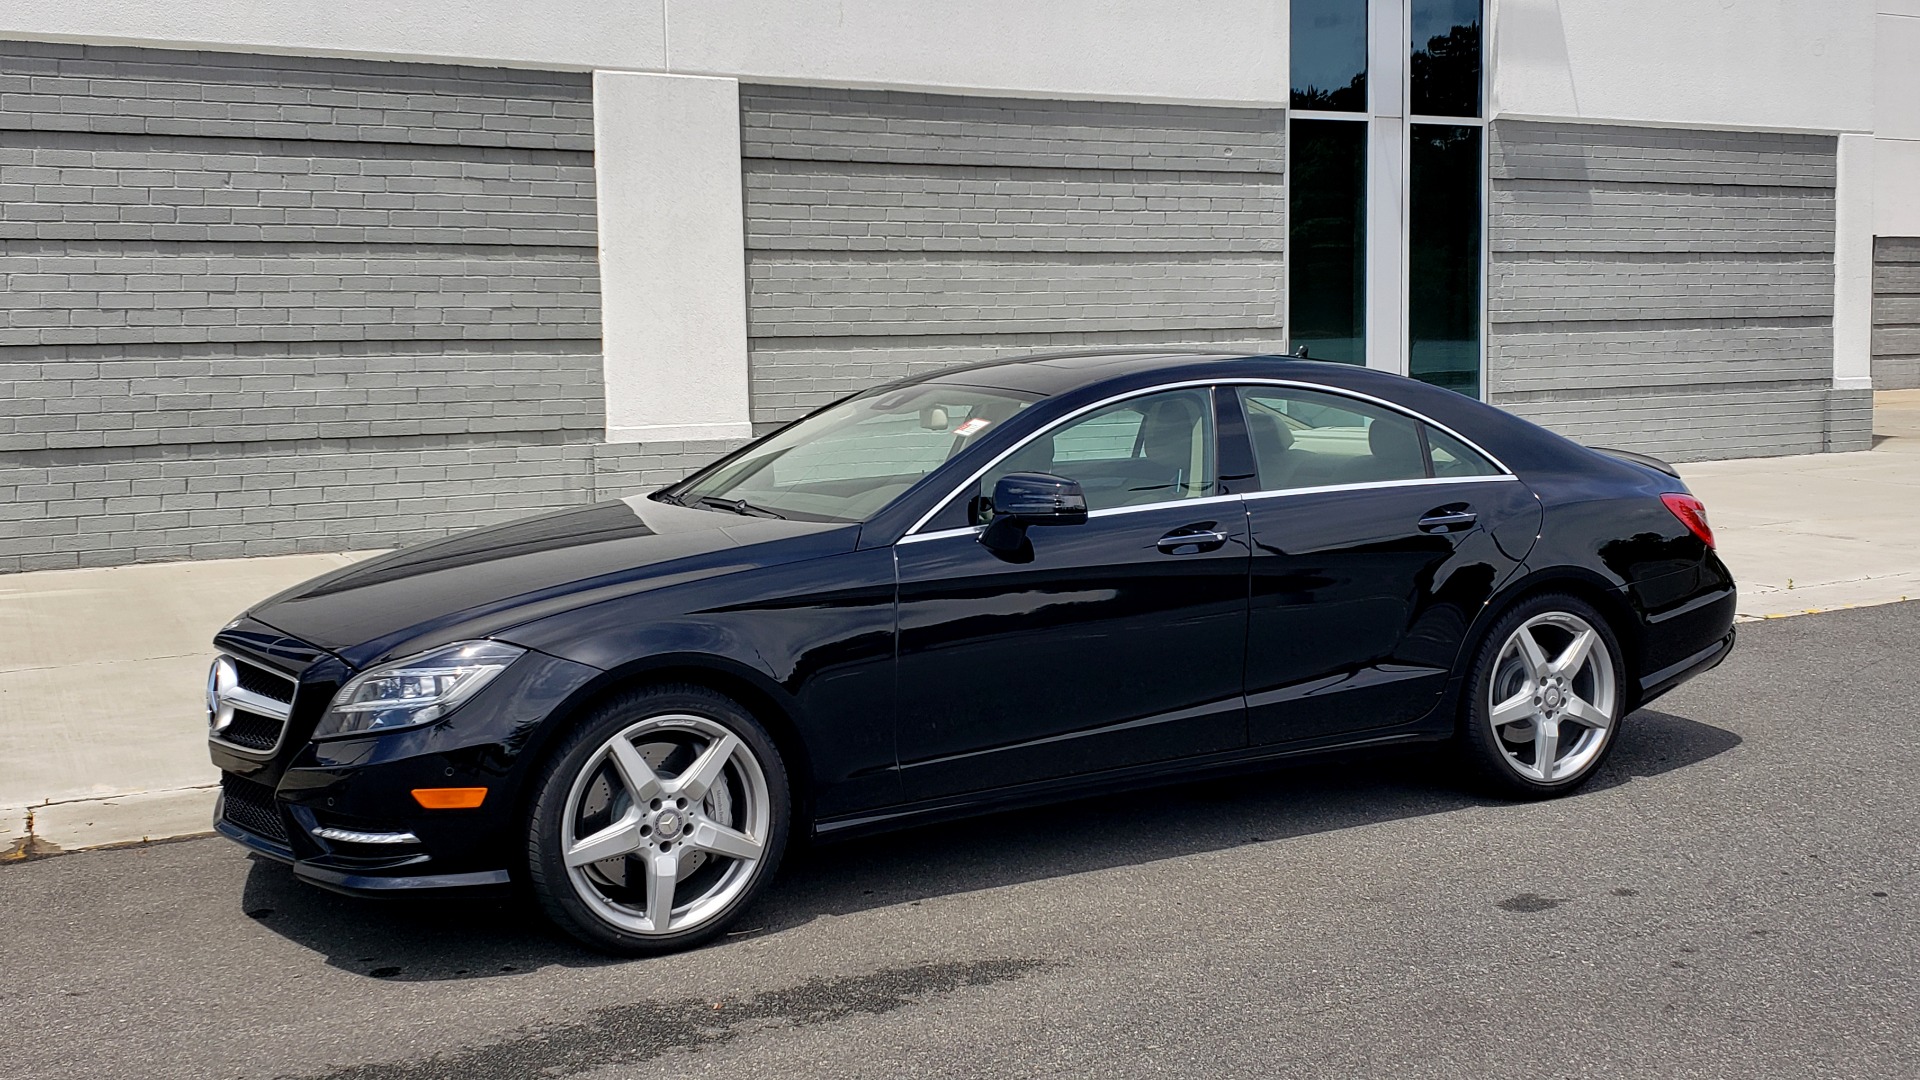 Used 2014 Mercedes-Benz CLS-Class CLS 550 PREMIUM / AMG SPORT WHLS / SUNROOF / LANE TRACK / PARKTRONIC for sale Sold at Formula Imports in Charlotte NC 28227 4